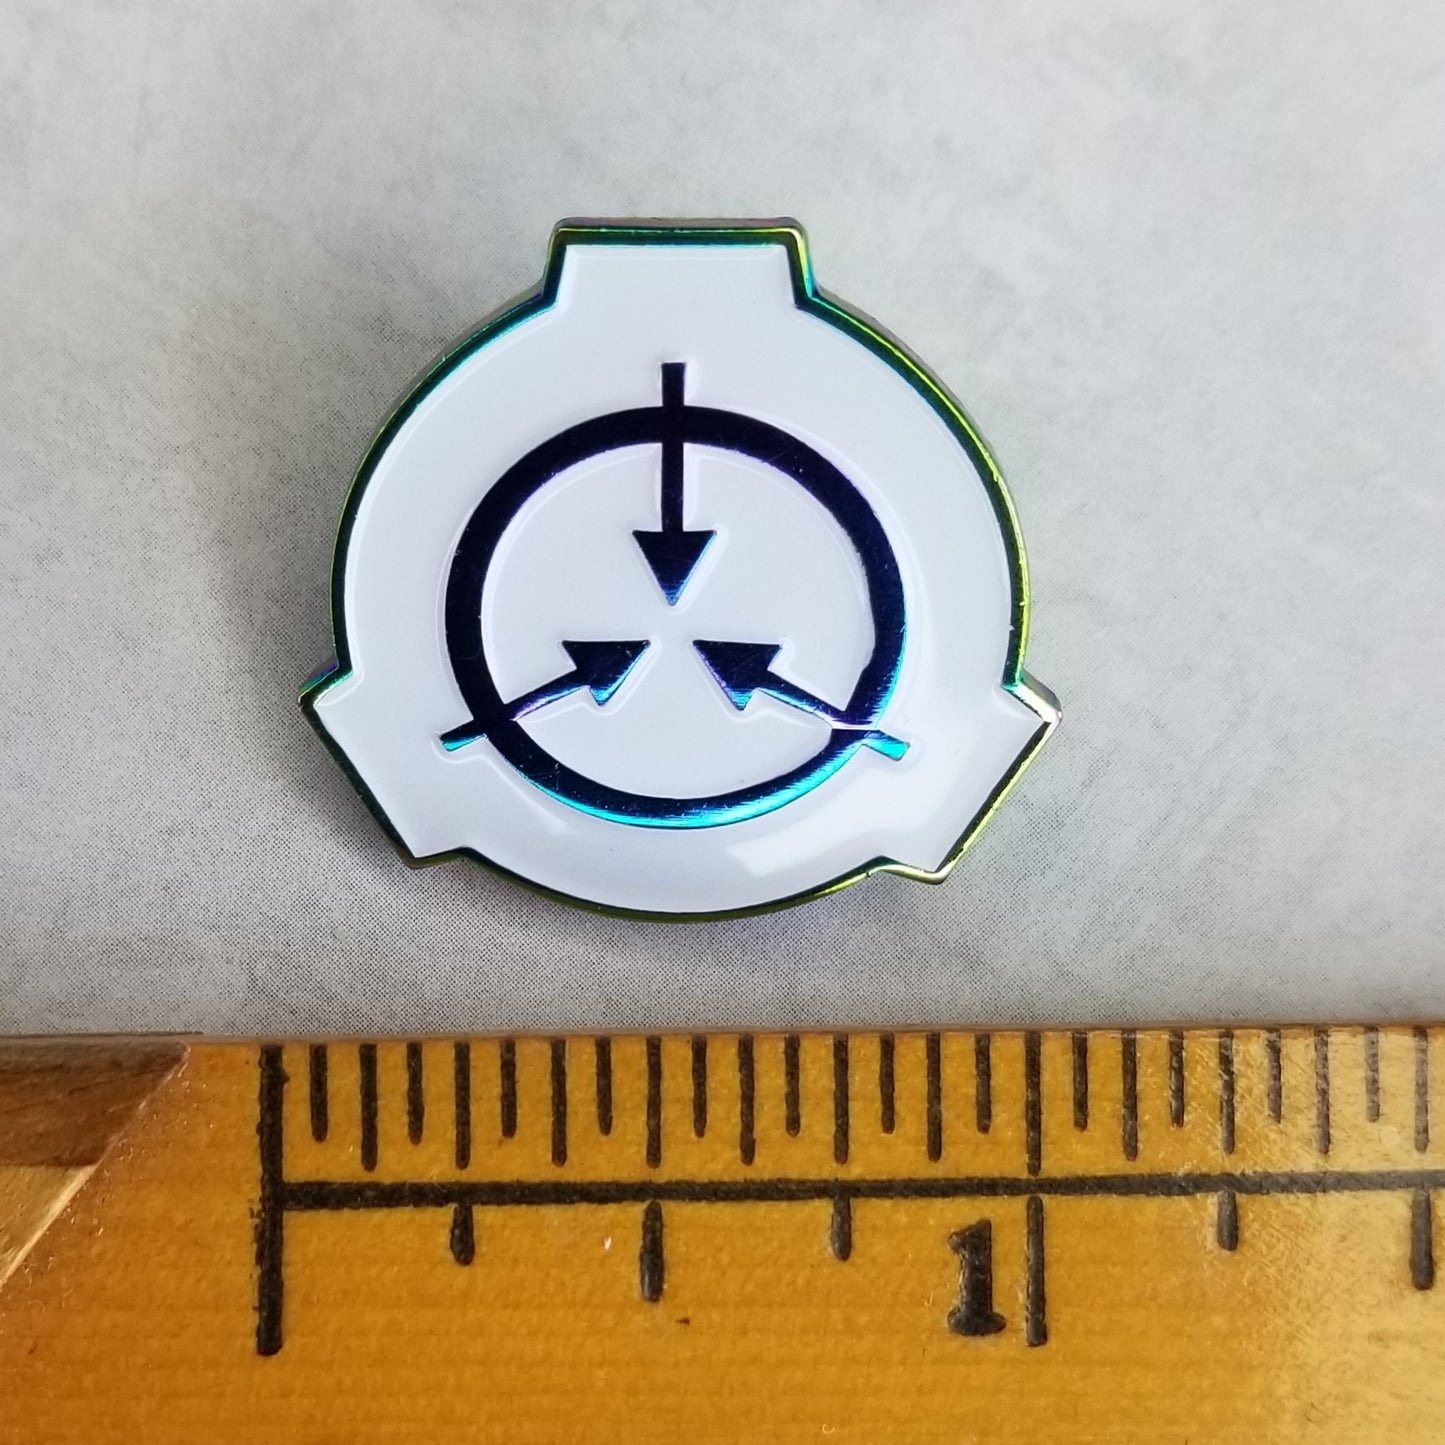 Pin on SCP